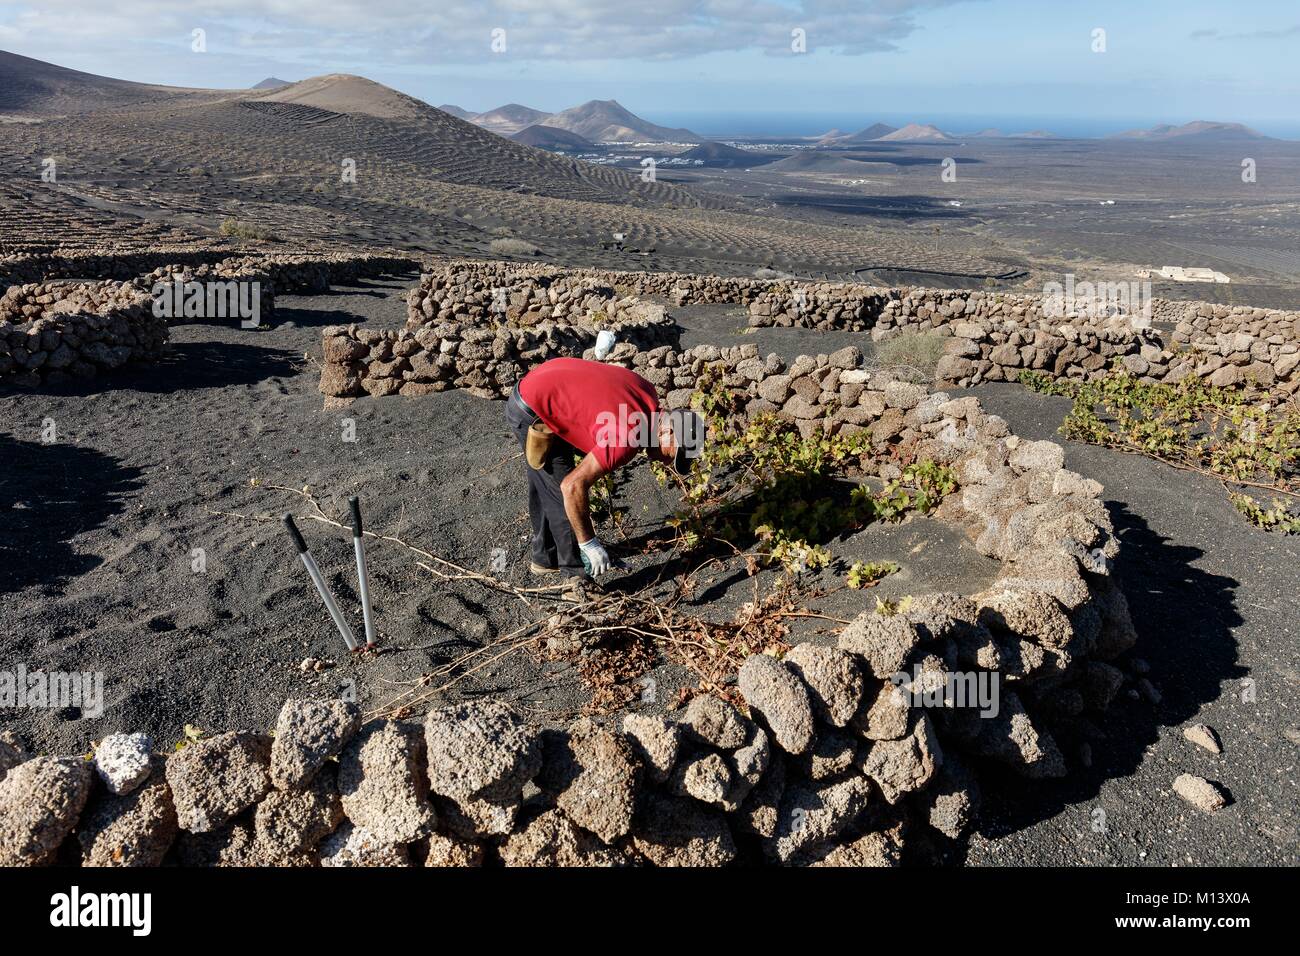 Spain, Canary Islands, Lanzarote Island, La Geria, vinegrower pruning the vine protected by stone low walls in lapilli (volcanic sand) before volcanoes Stock Photo